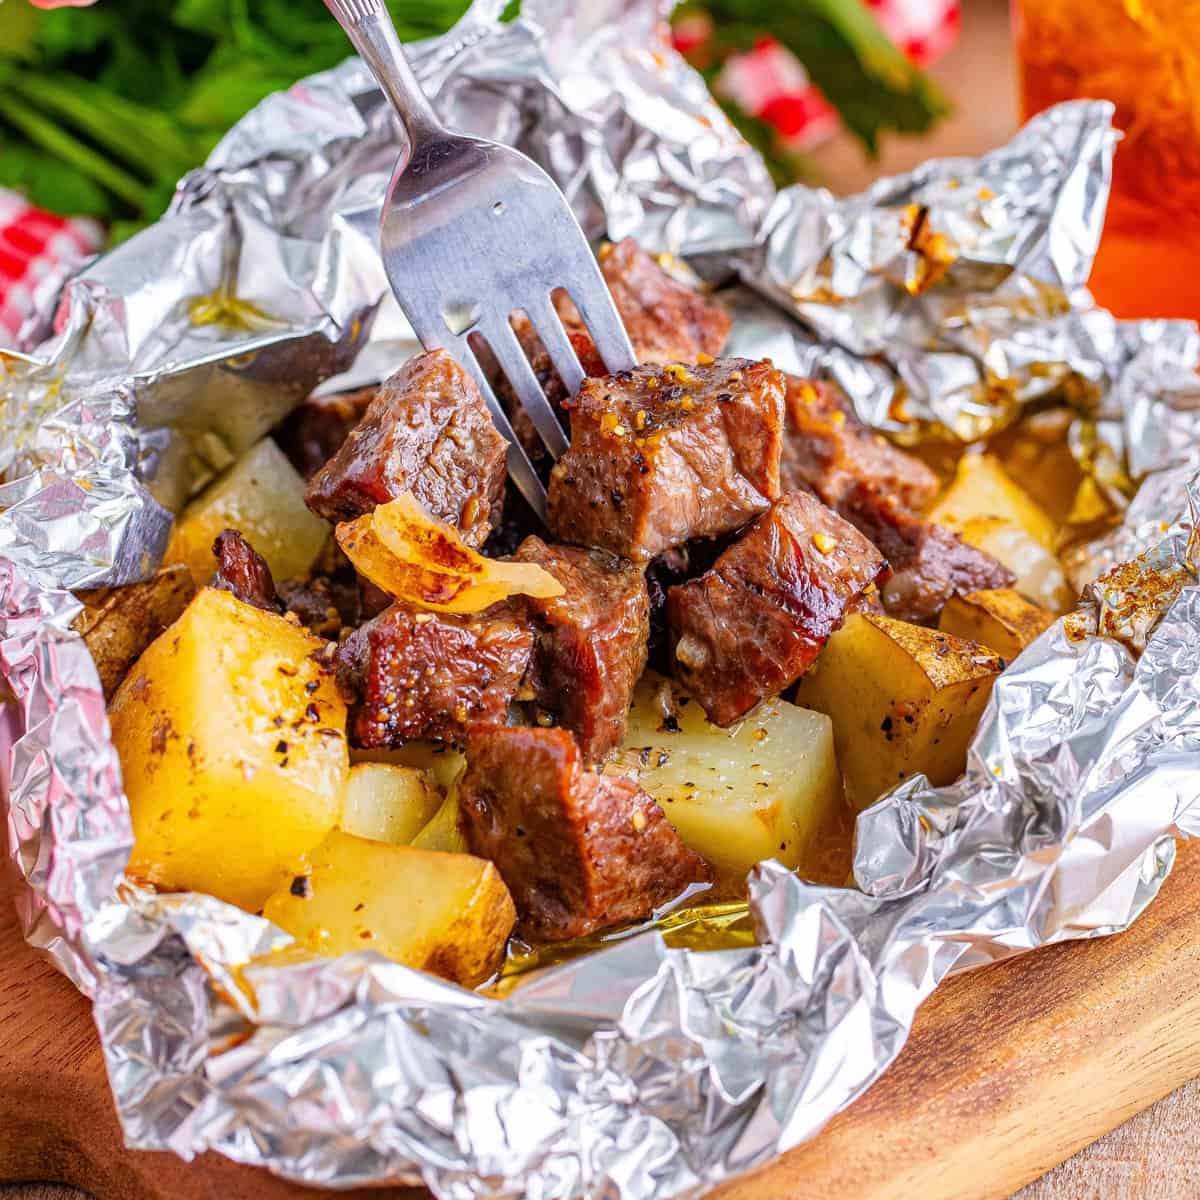 Grilled Steak and Potato Packets (Hobo Packets)